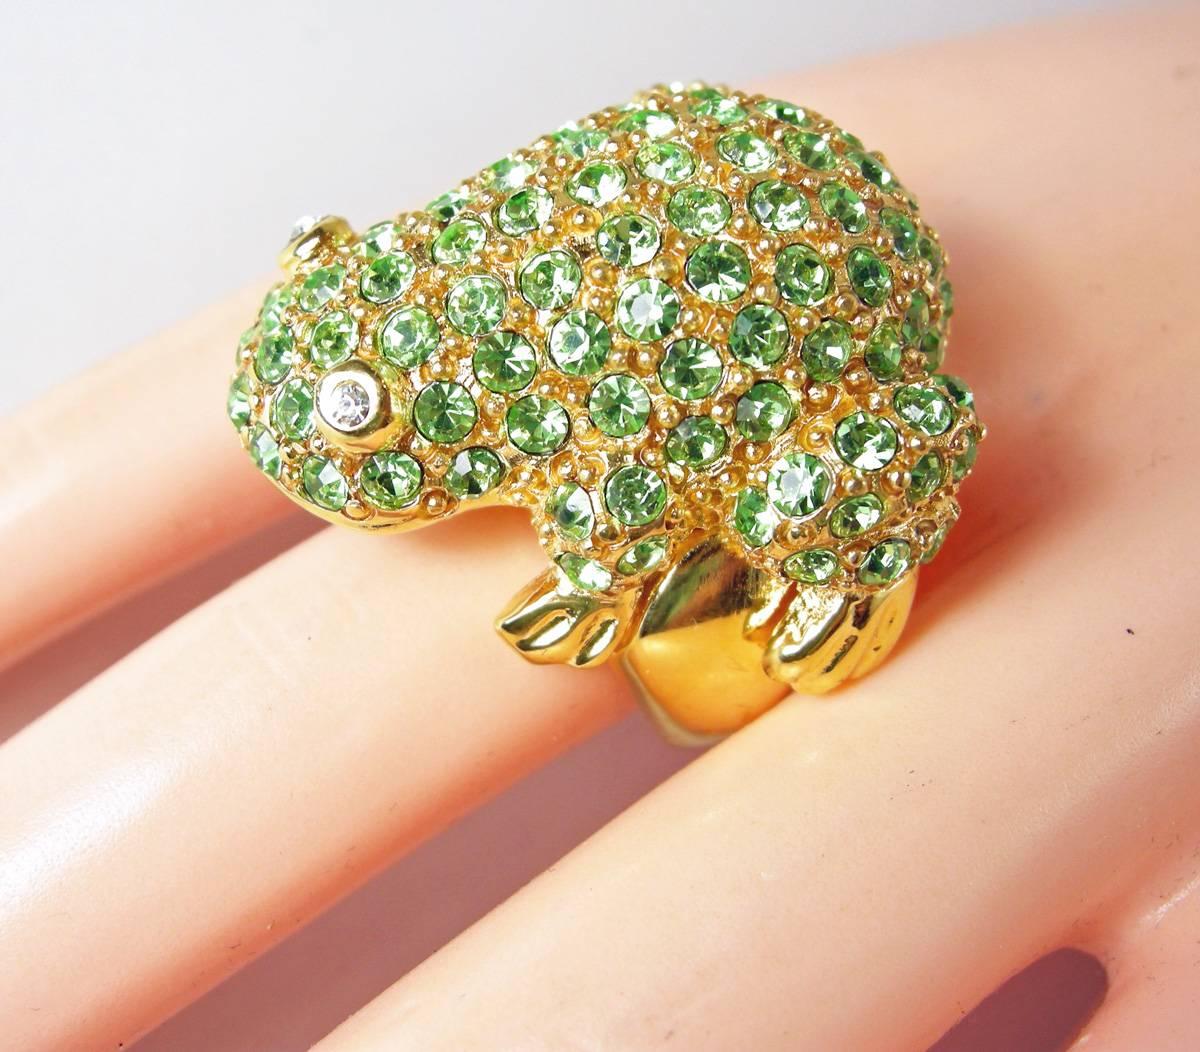 This is a wonderful ring by Kenneth Jay Lane.  It is a green frog embedded with bright green rhinestones.  It is a gold tone setting.  The ring size is 7-3/4 with a ring guard inside.  It is signed “Kenneth Lane” and in excellent condition.